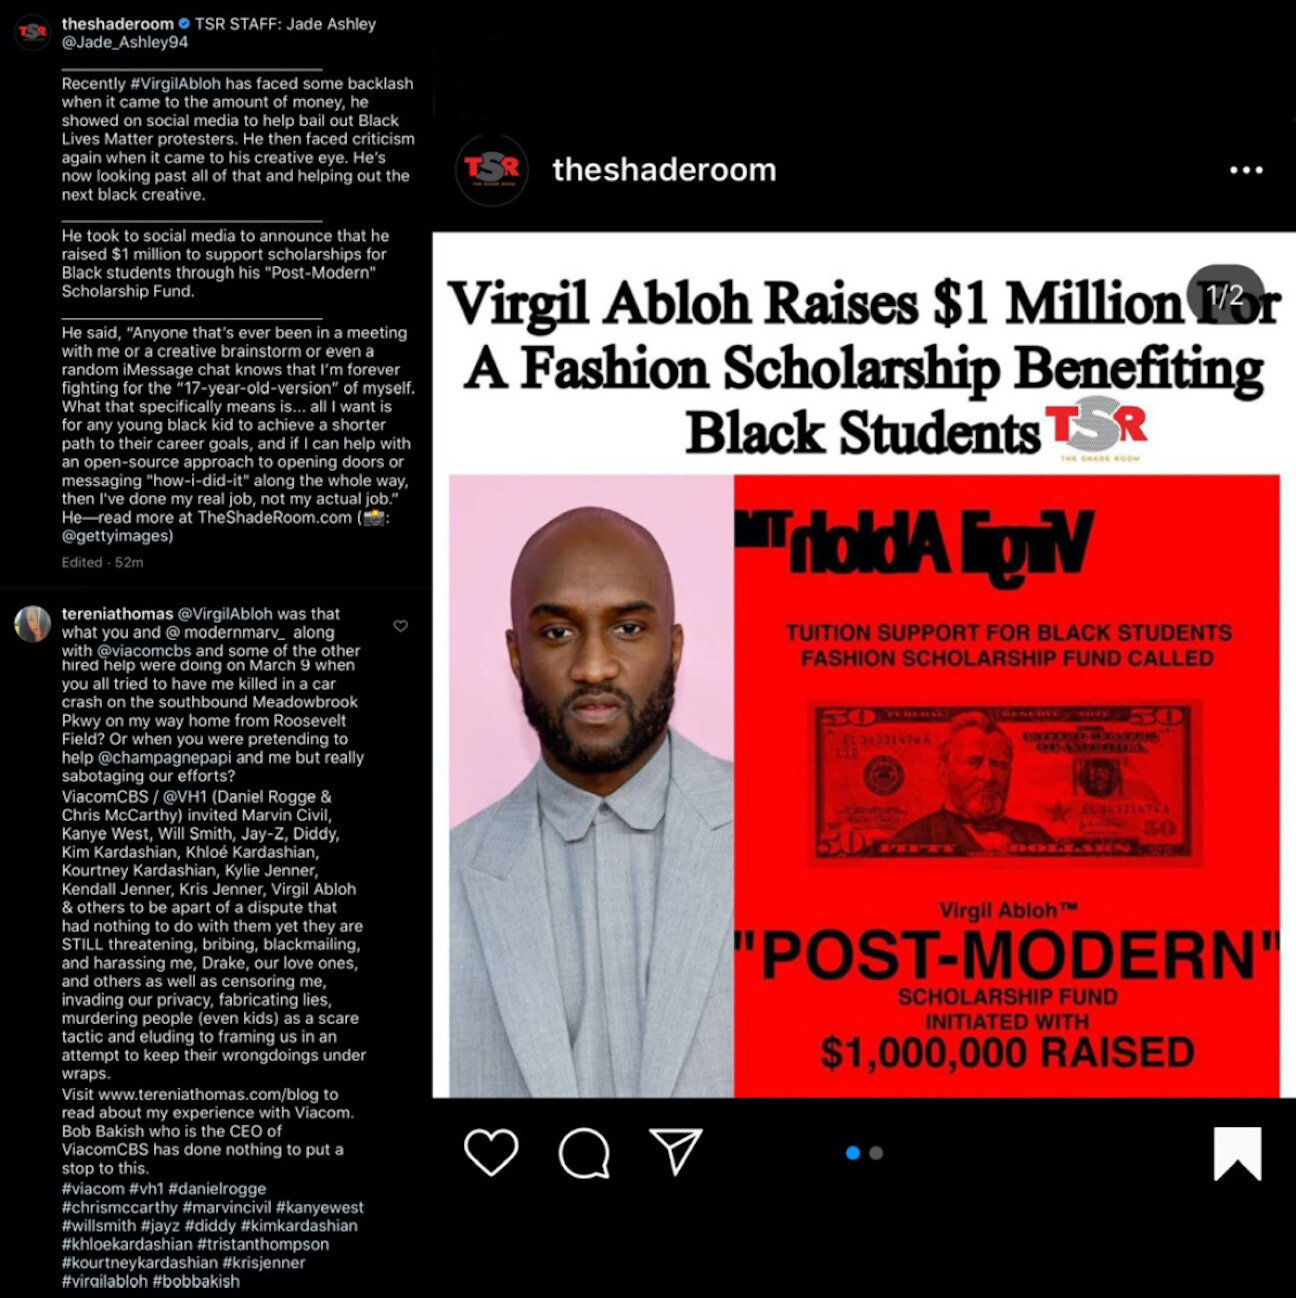 virgil abloh was trying to  bribe me as well as force marvin civil aka modernmarv_ onto me even though virgil knows I want nothing to do with marvin &amp; he has hiv which is why the image is red